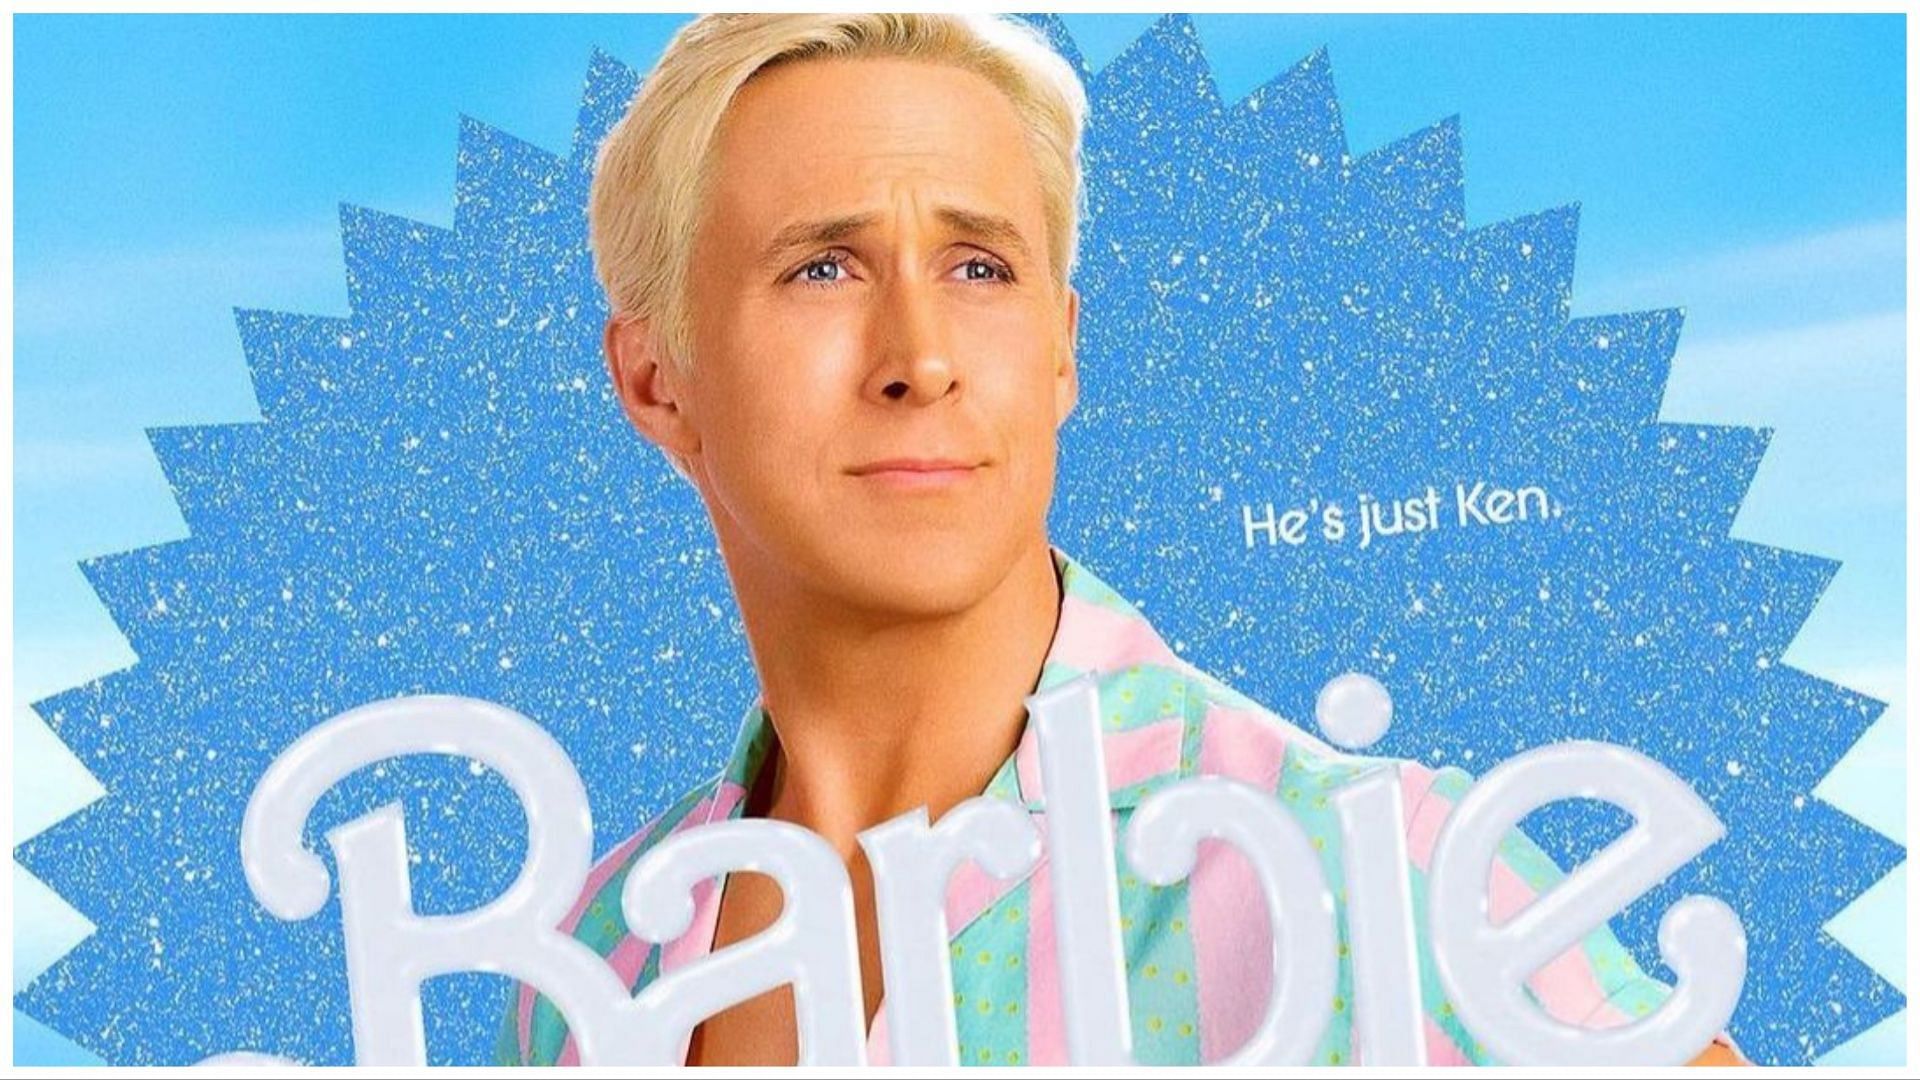 Ryan Gosling workout and diet routine helped him prepare for role in Barbie movie. (Image via Instagram)